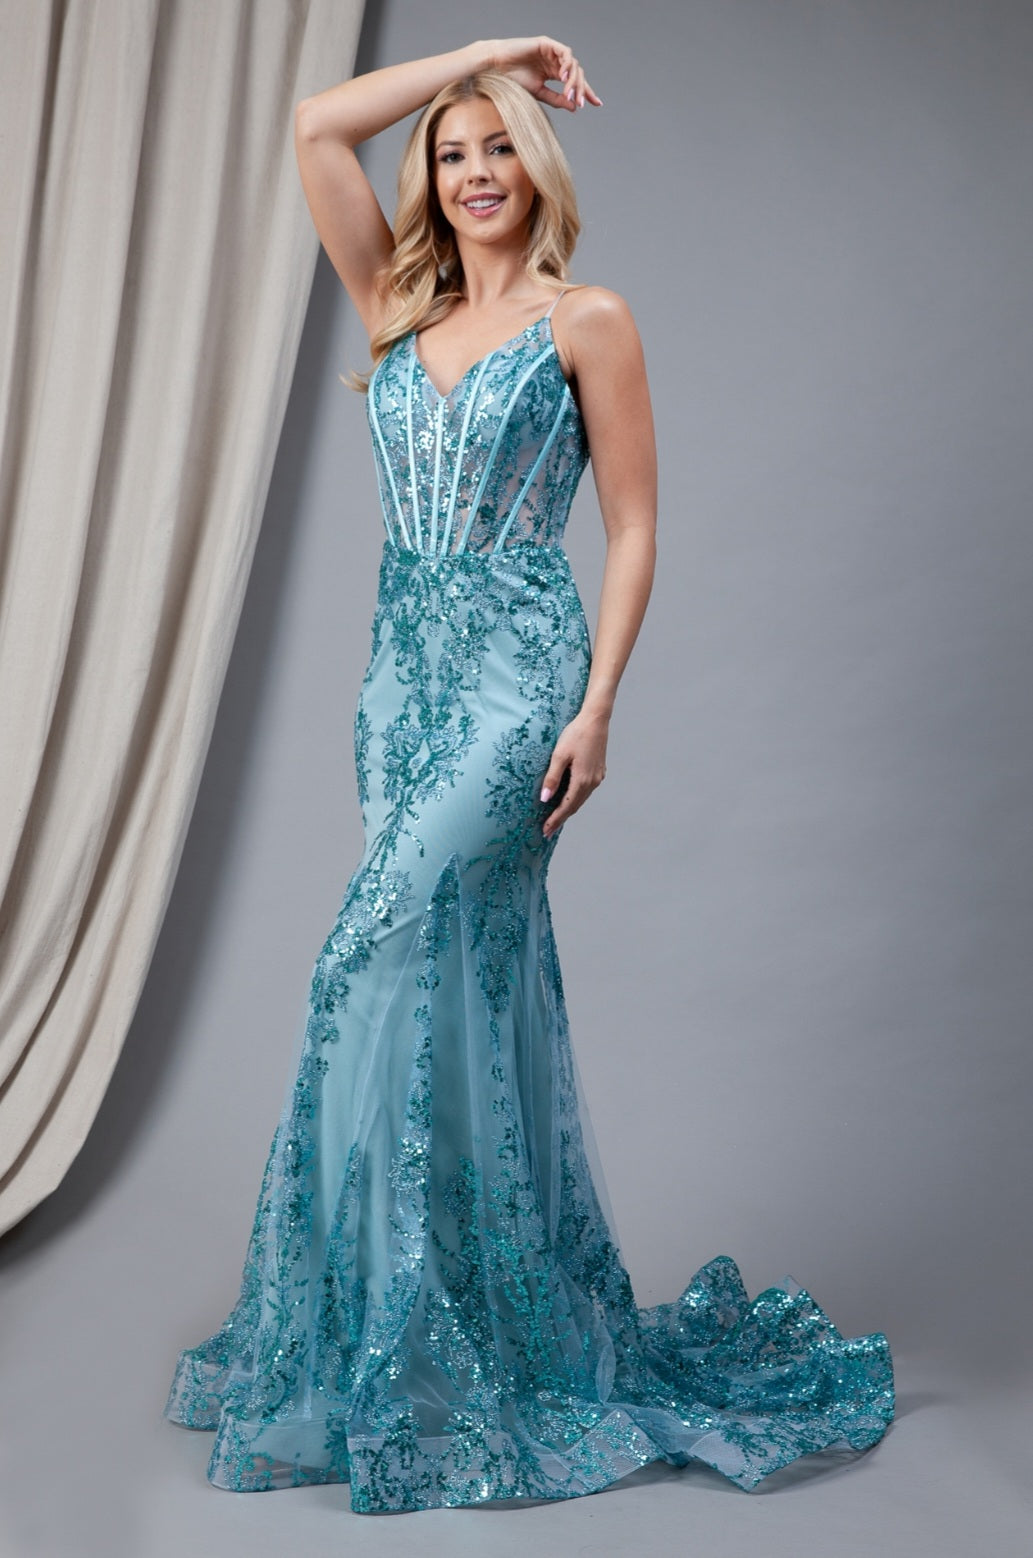 Gown features a sweetheart neckline, spaghetti straps and a V-back